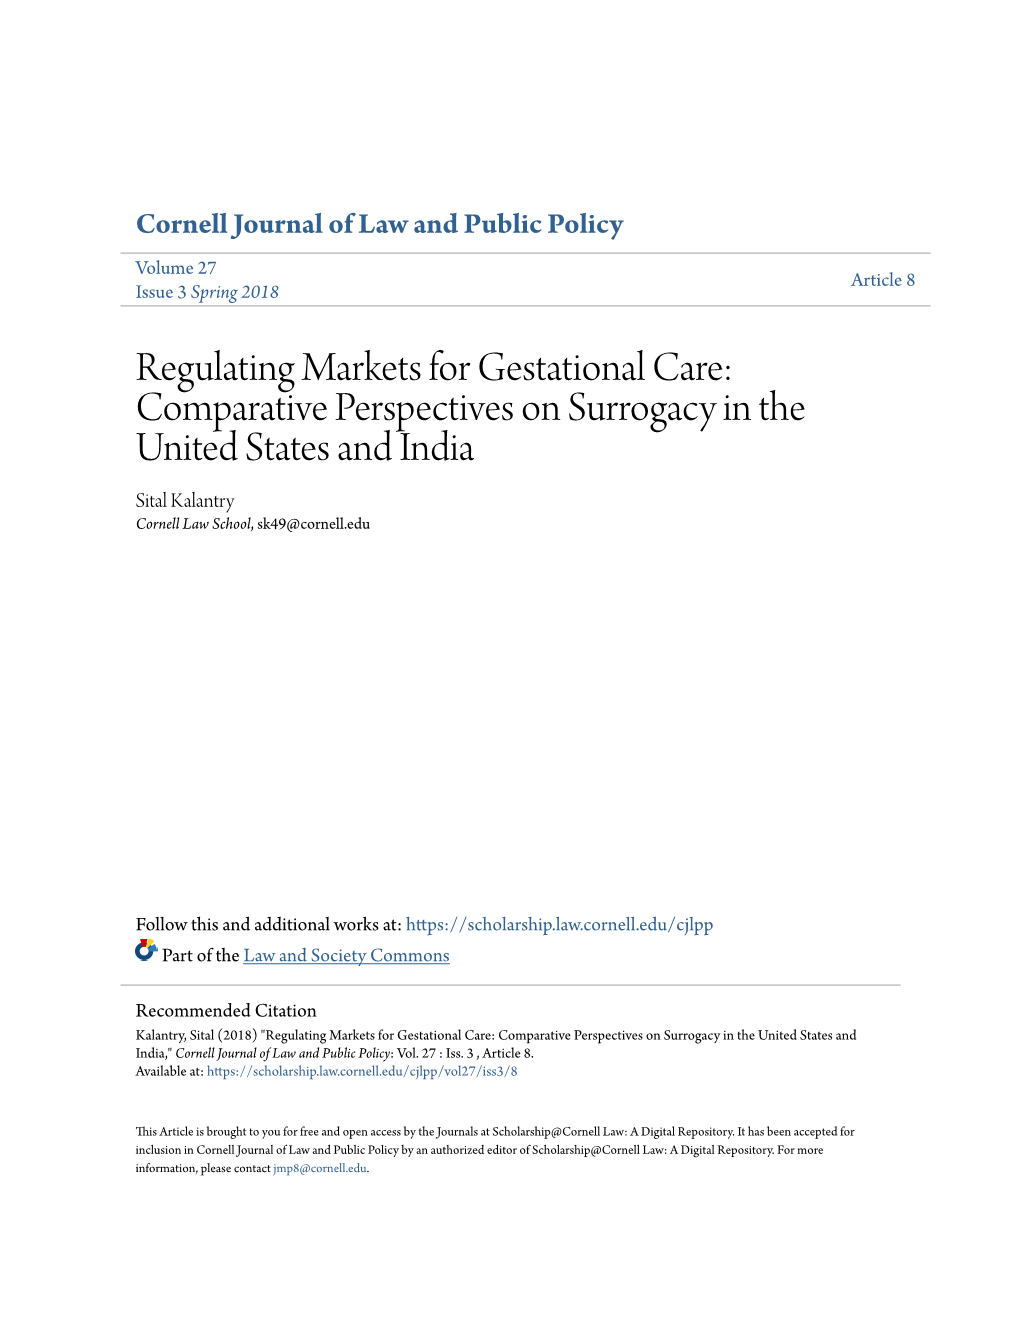 Regulating Markets for Gestational Care: Comparative Perspectives on Surrogacy in the United States and India Sital Kalantry Cornell Law School, Sk49@Cornell.Edu